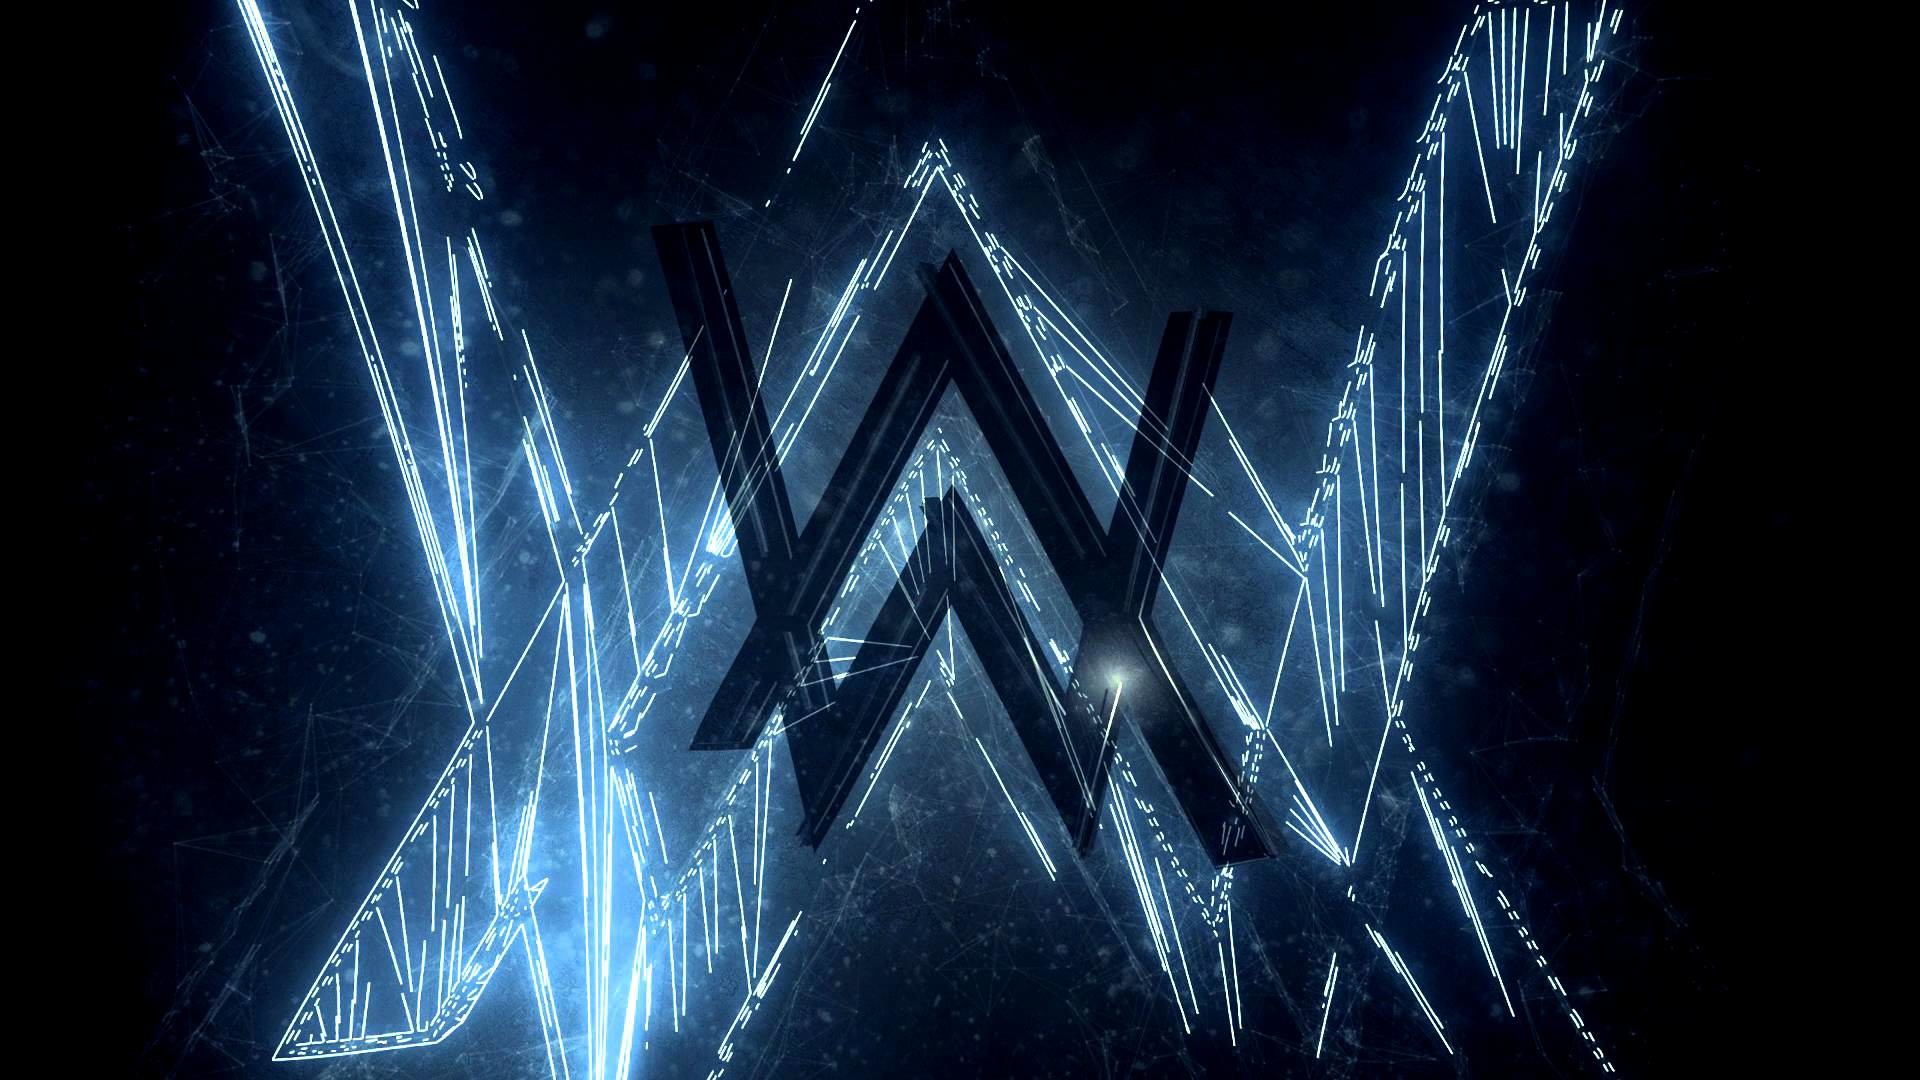 I have found some awesome Alan Walker wallpapers you might like here, feel free to check them out